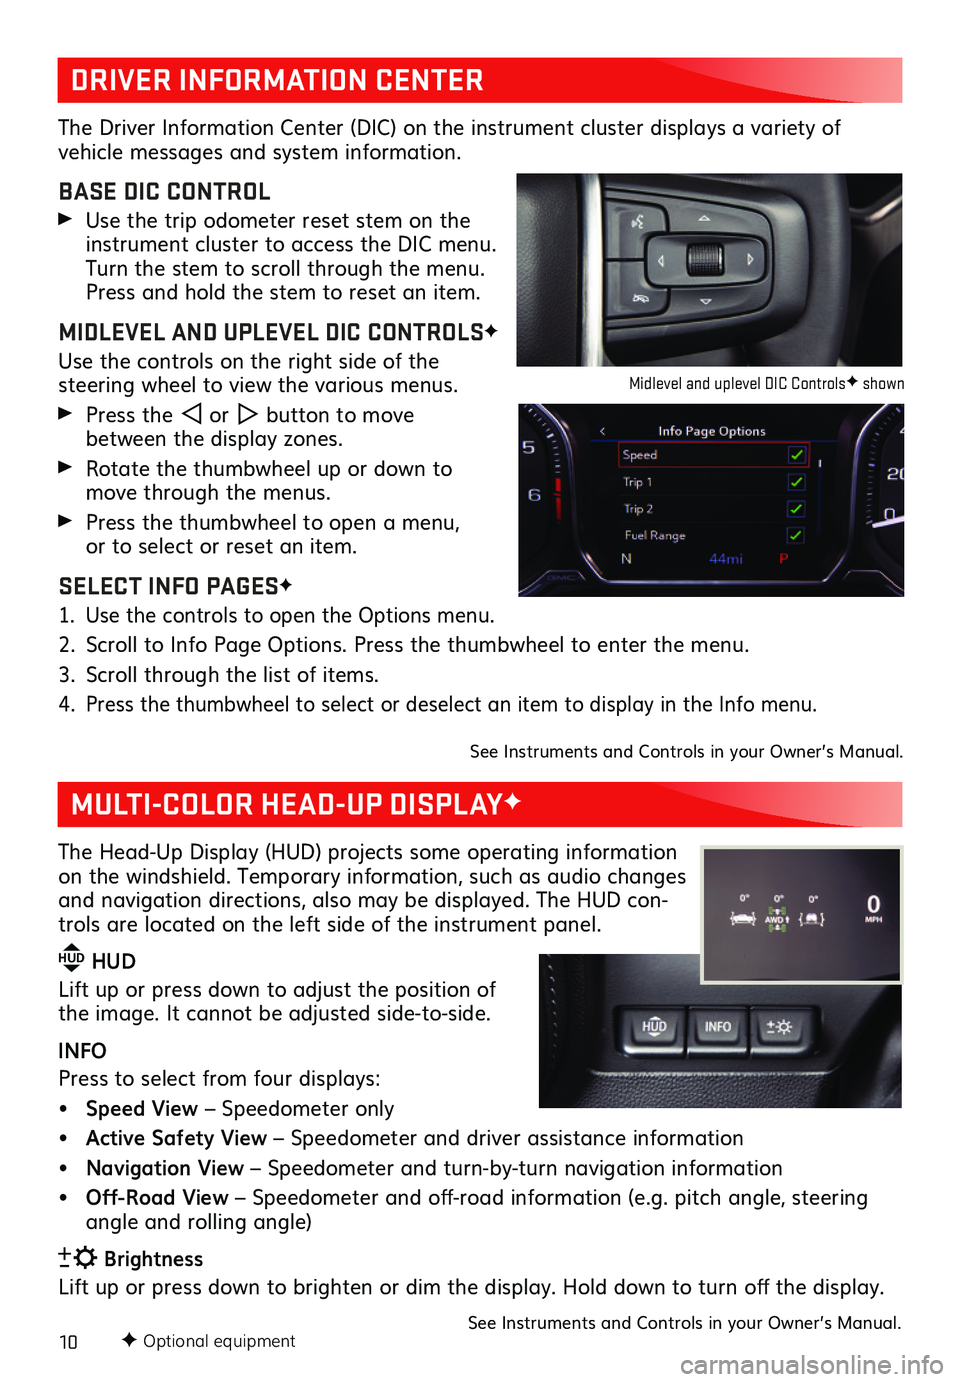 GMC SIERRA 2020  Get To Know Guide 10F Optional equipment
DRIVER INFORMATION CENTER
MULTI-COLOR HEAD-UP DISPLAYF
The Driver Information Center (DIC) on the instrument cluster displays a variety of  
vehicle messages and system informat